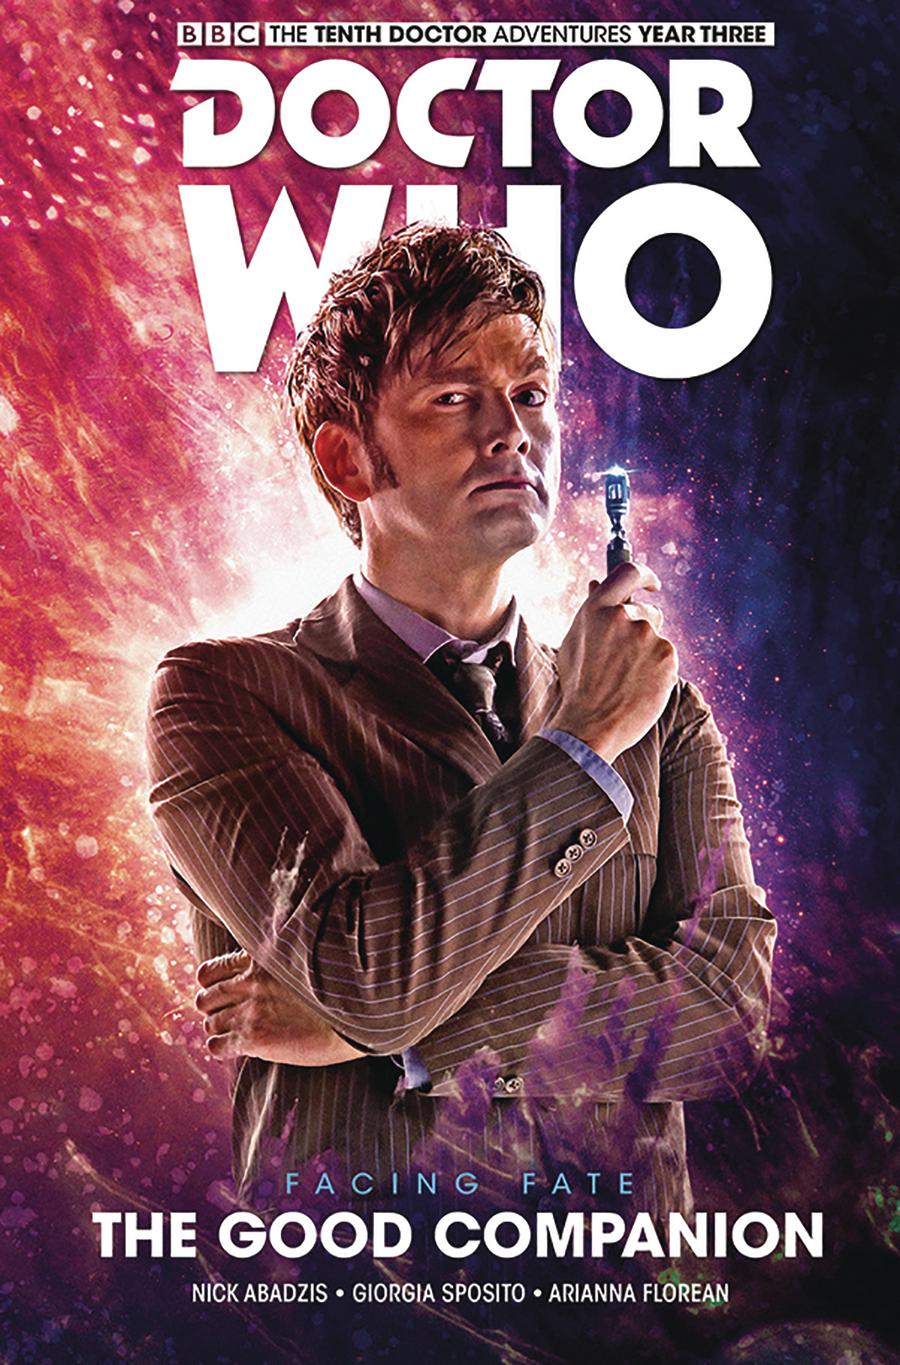 Doctor Who 10th Doctor Facing Fate Vol 3 Good Companion HC